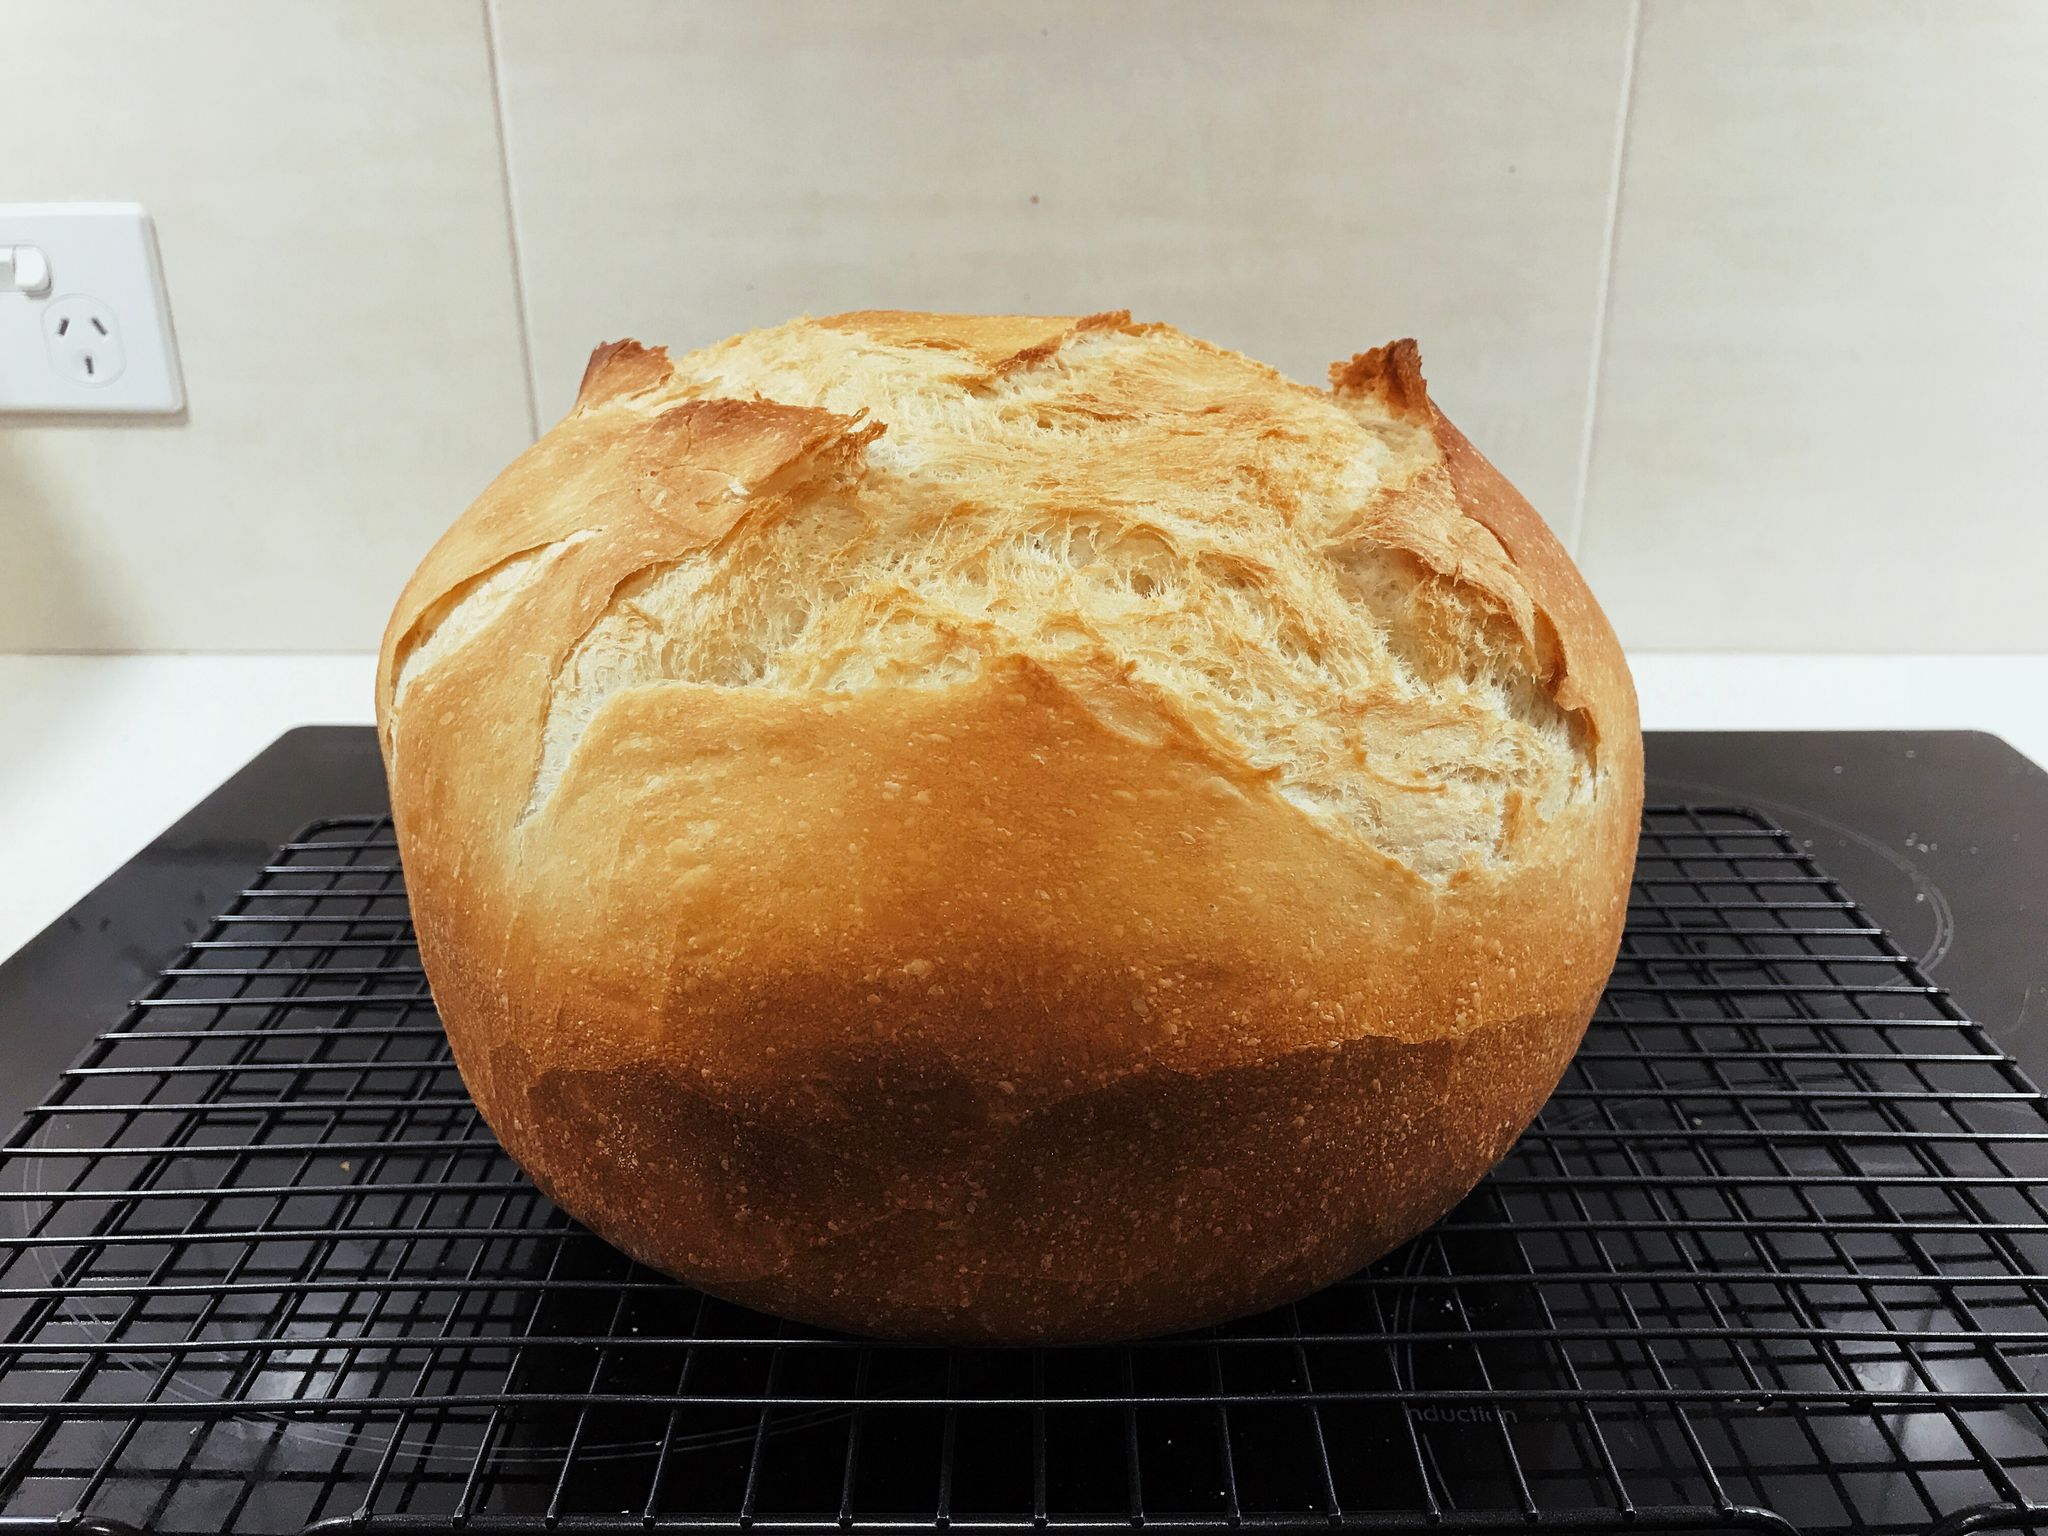 A photo of a large round of white bread with a deliciously crunchy golden brown crust on it.